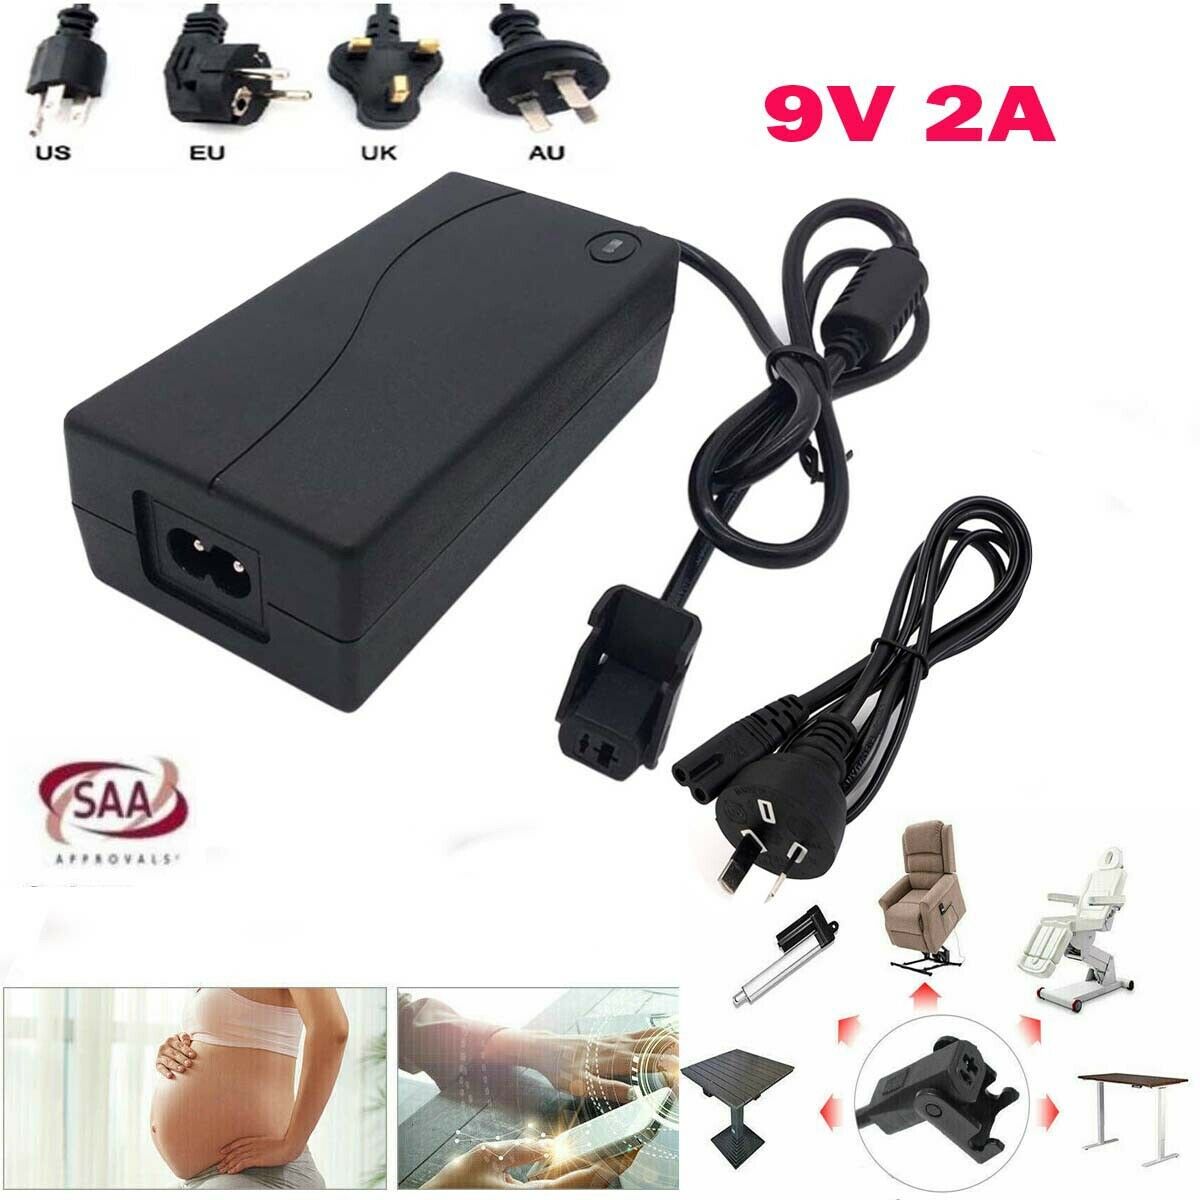 29V AC/DC Power Supply Electric Recliner Sofa Lift Chair Adapter Transformer US Brand: Unbranded